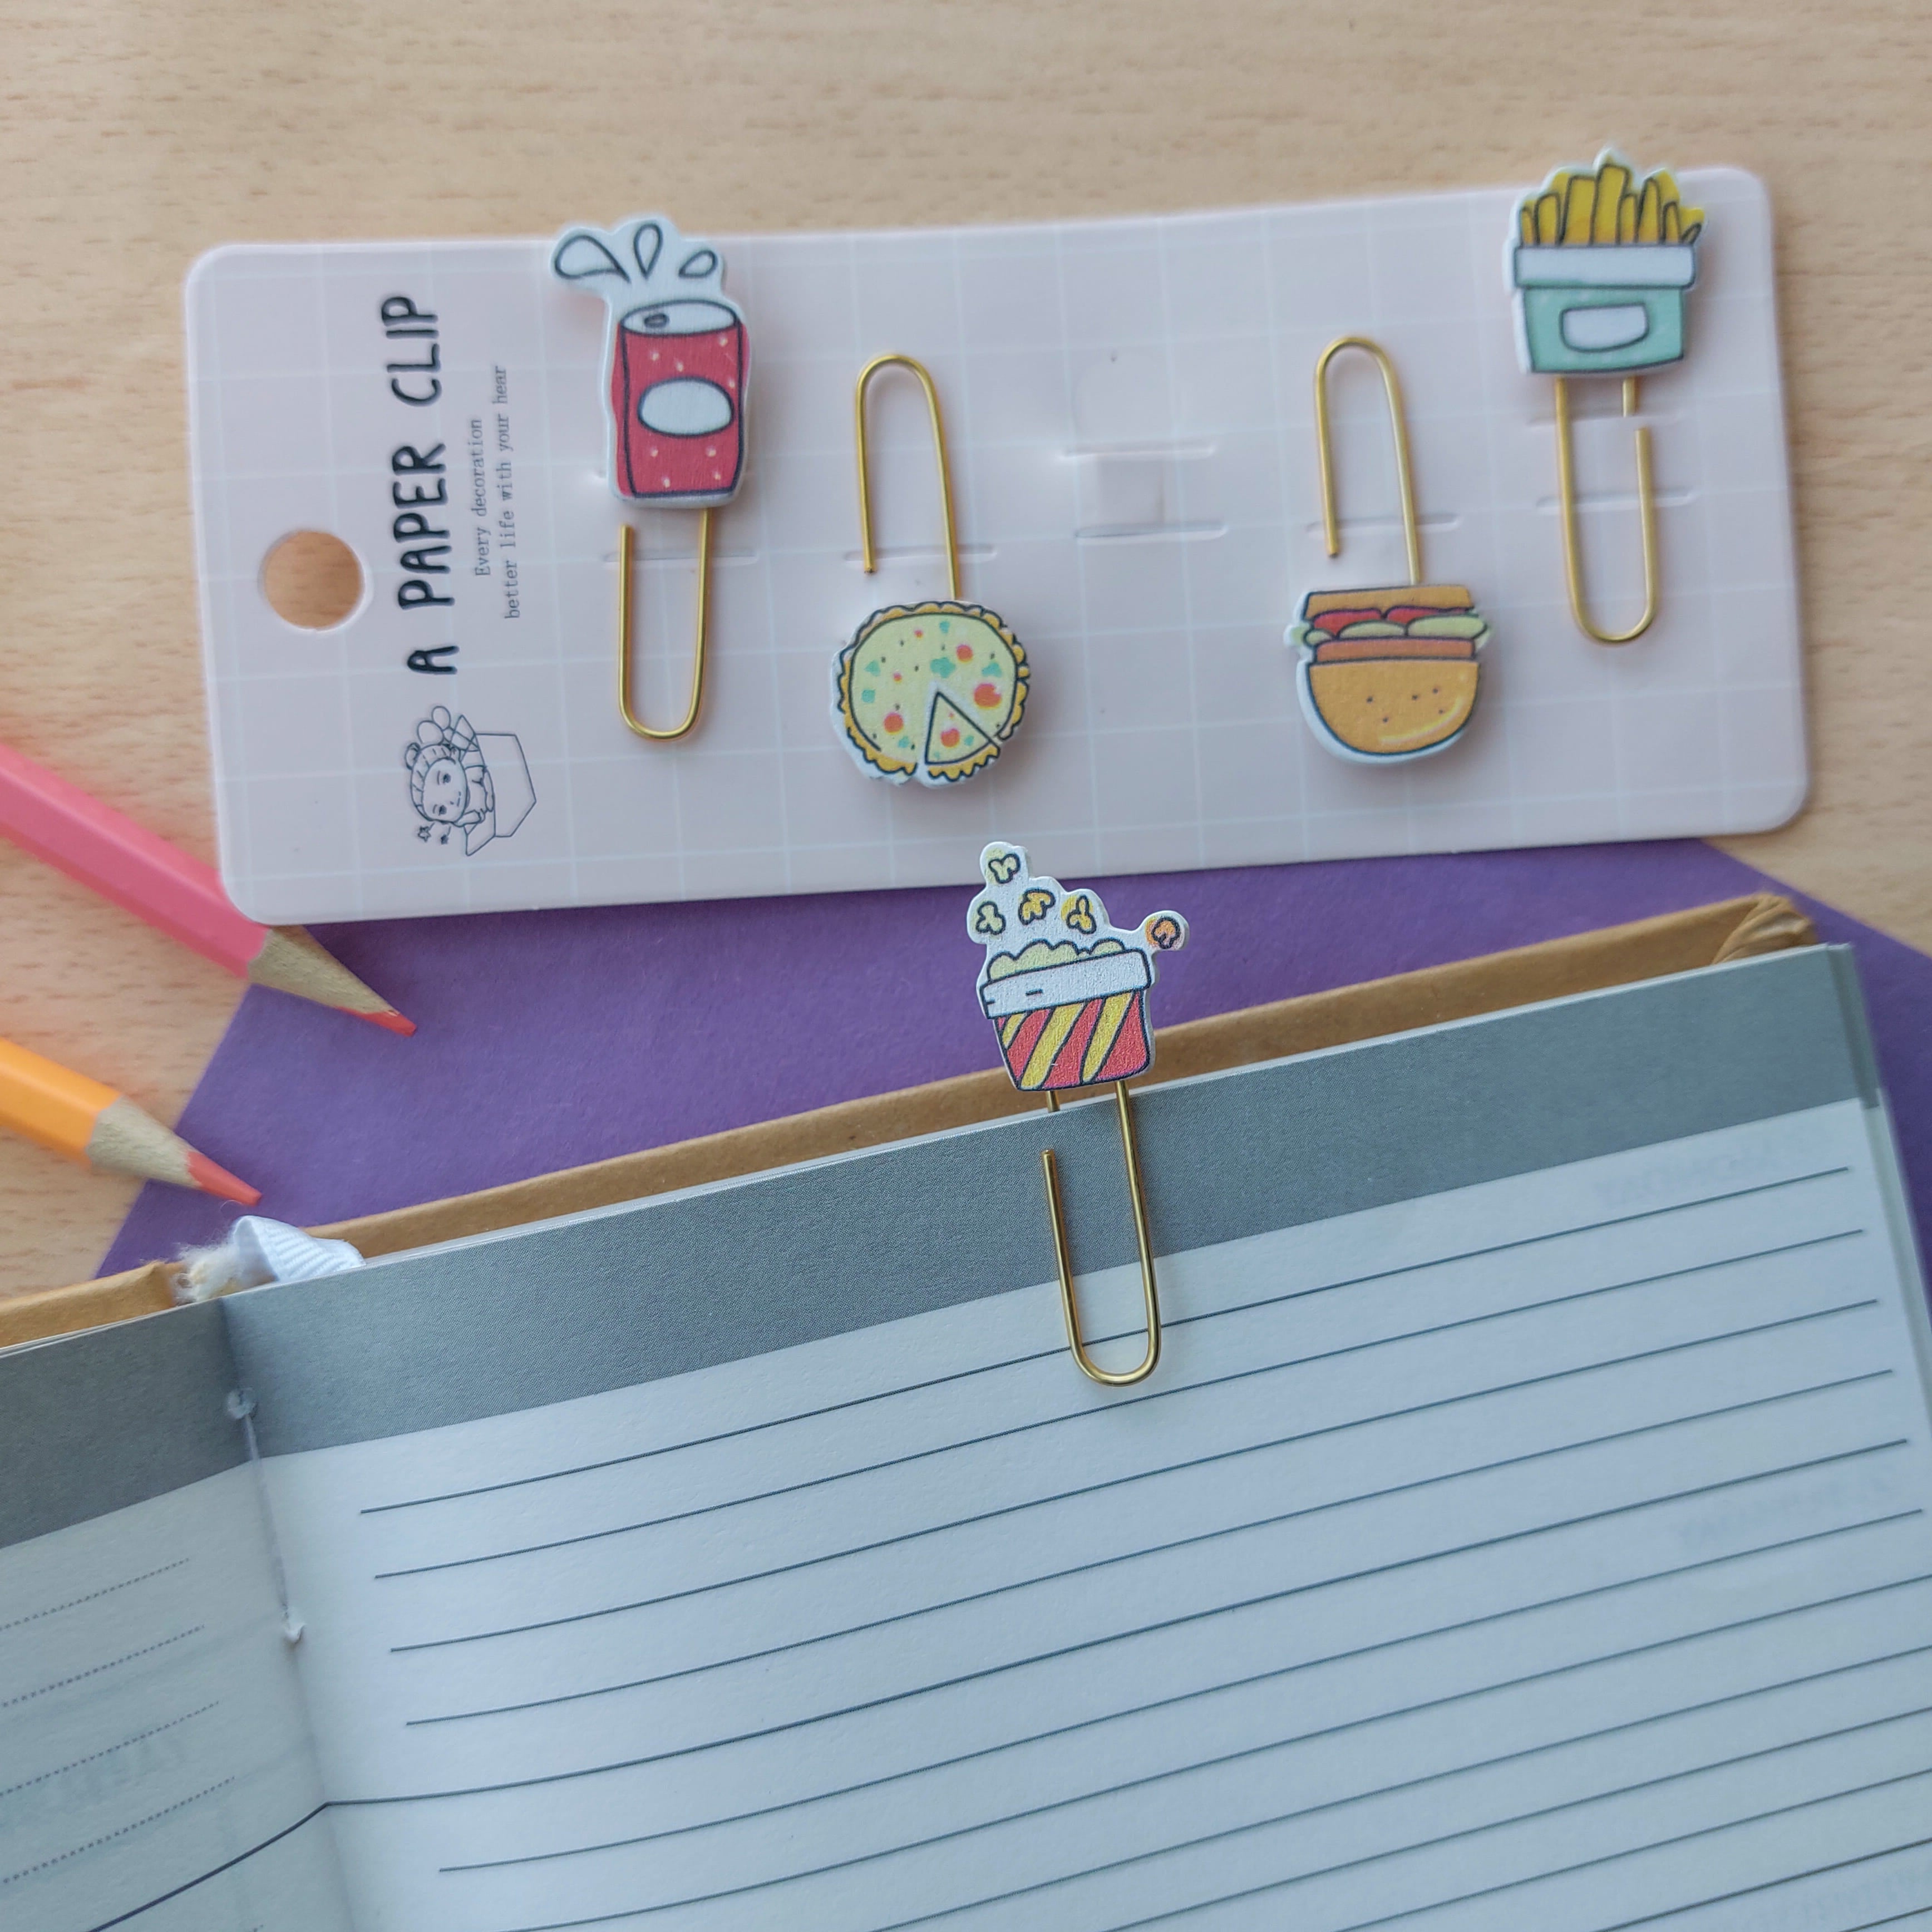 Paperclips 5pc Set